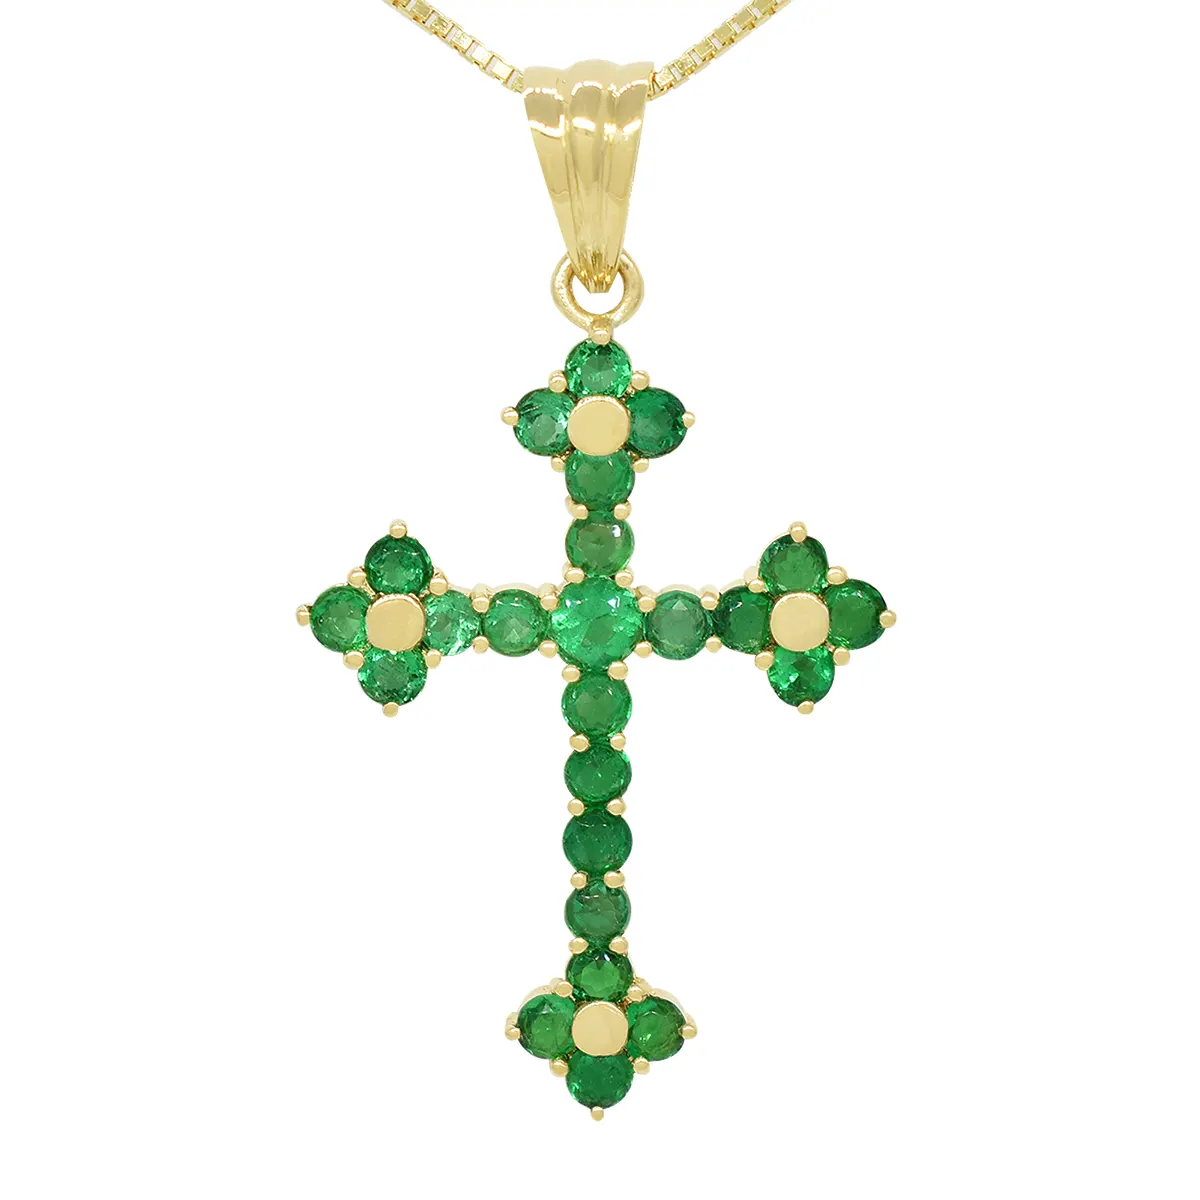 Emerald cross pendant in 18K yellow gold with 1.70 Ct. t.w. in 24 round cut natural Colombian emeralds with vivid green color